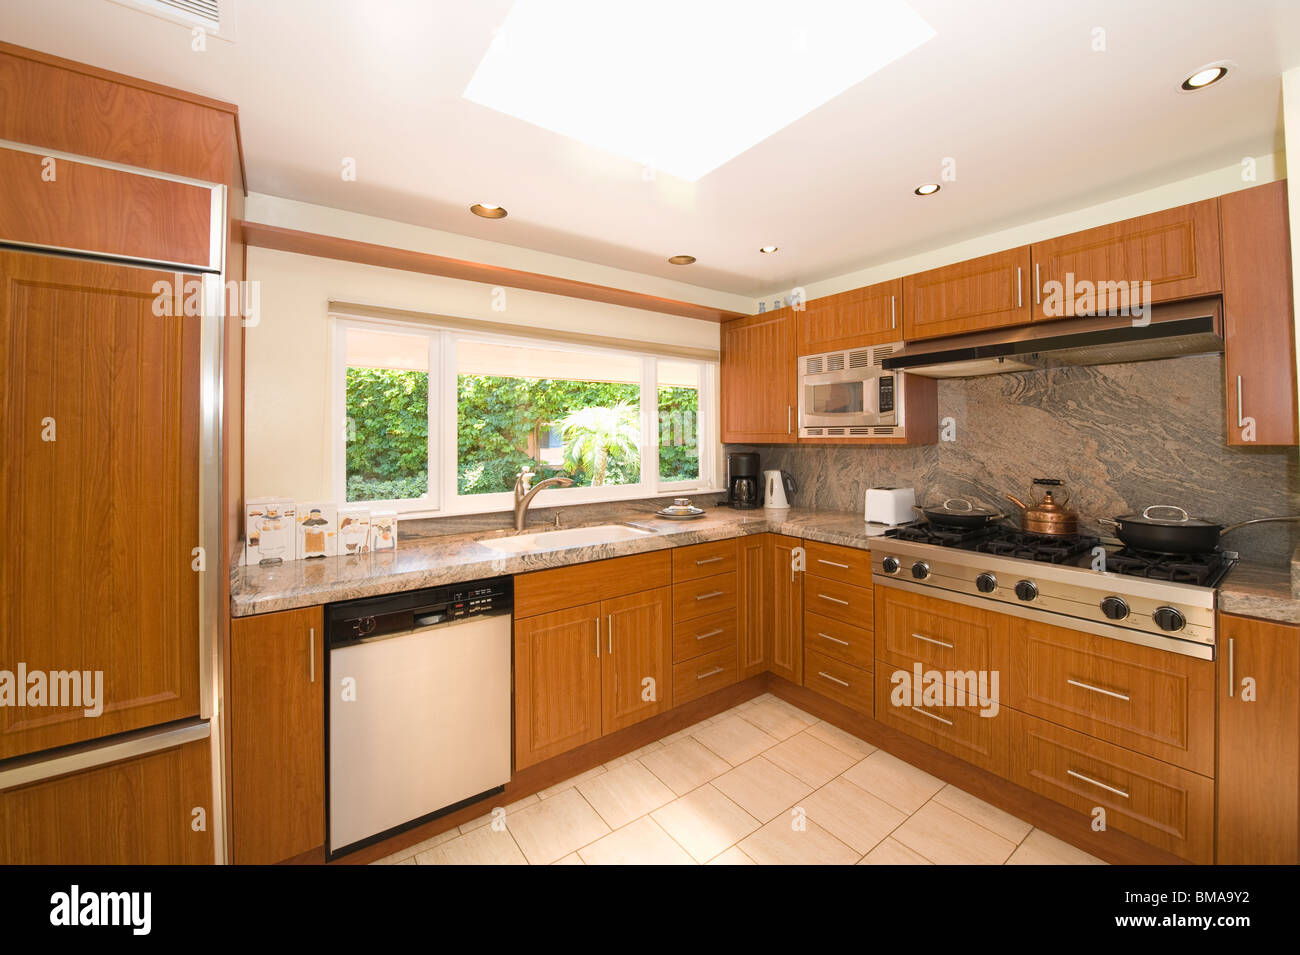 Wooden fitted kitchen units Stock Photo